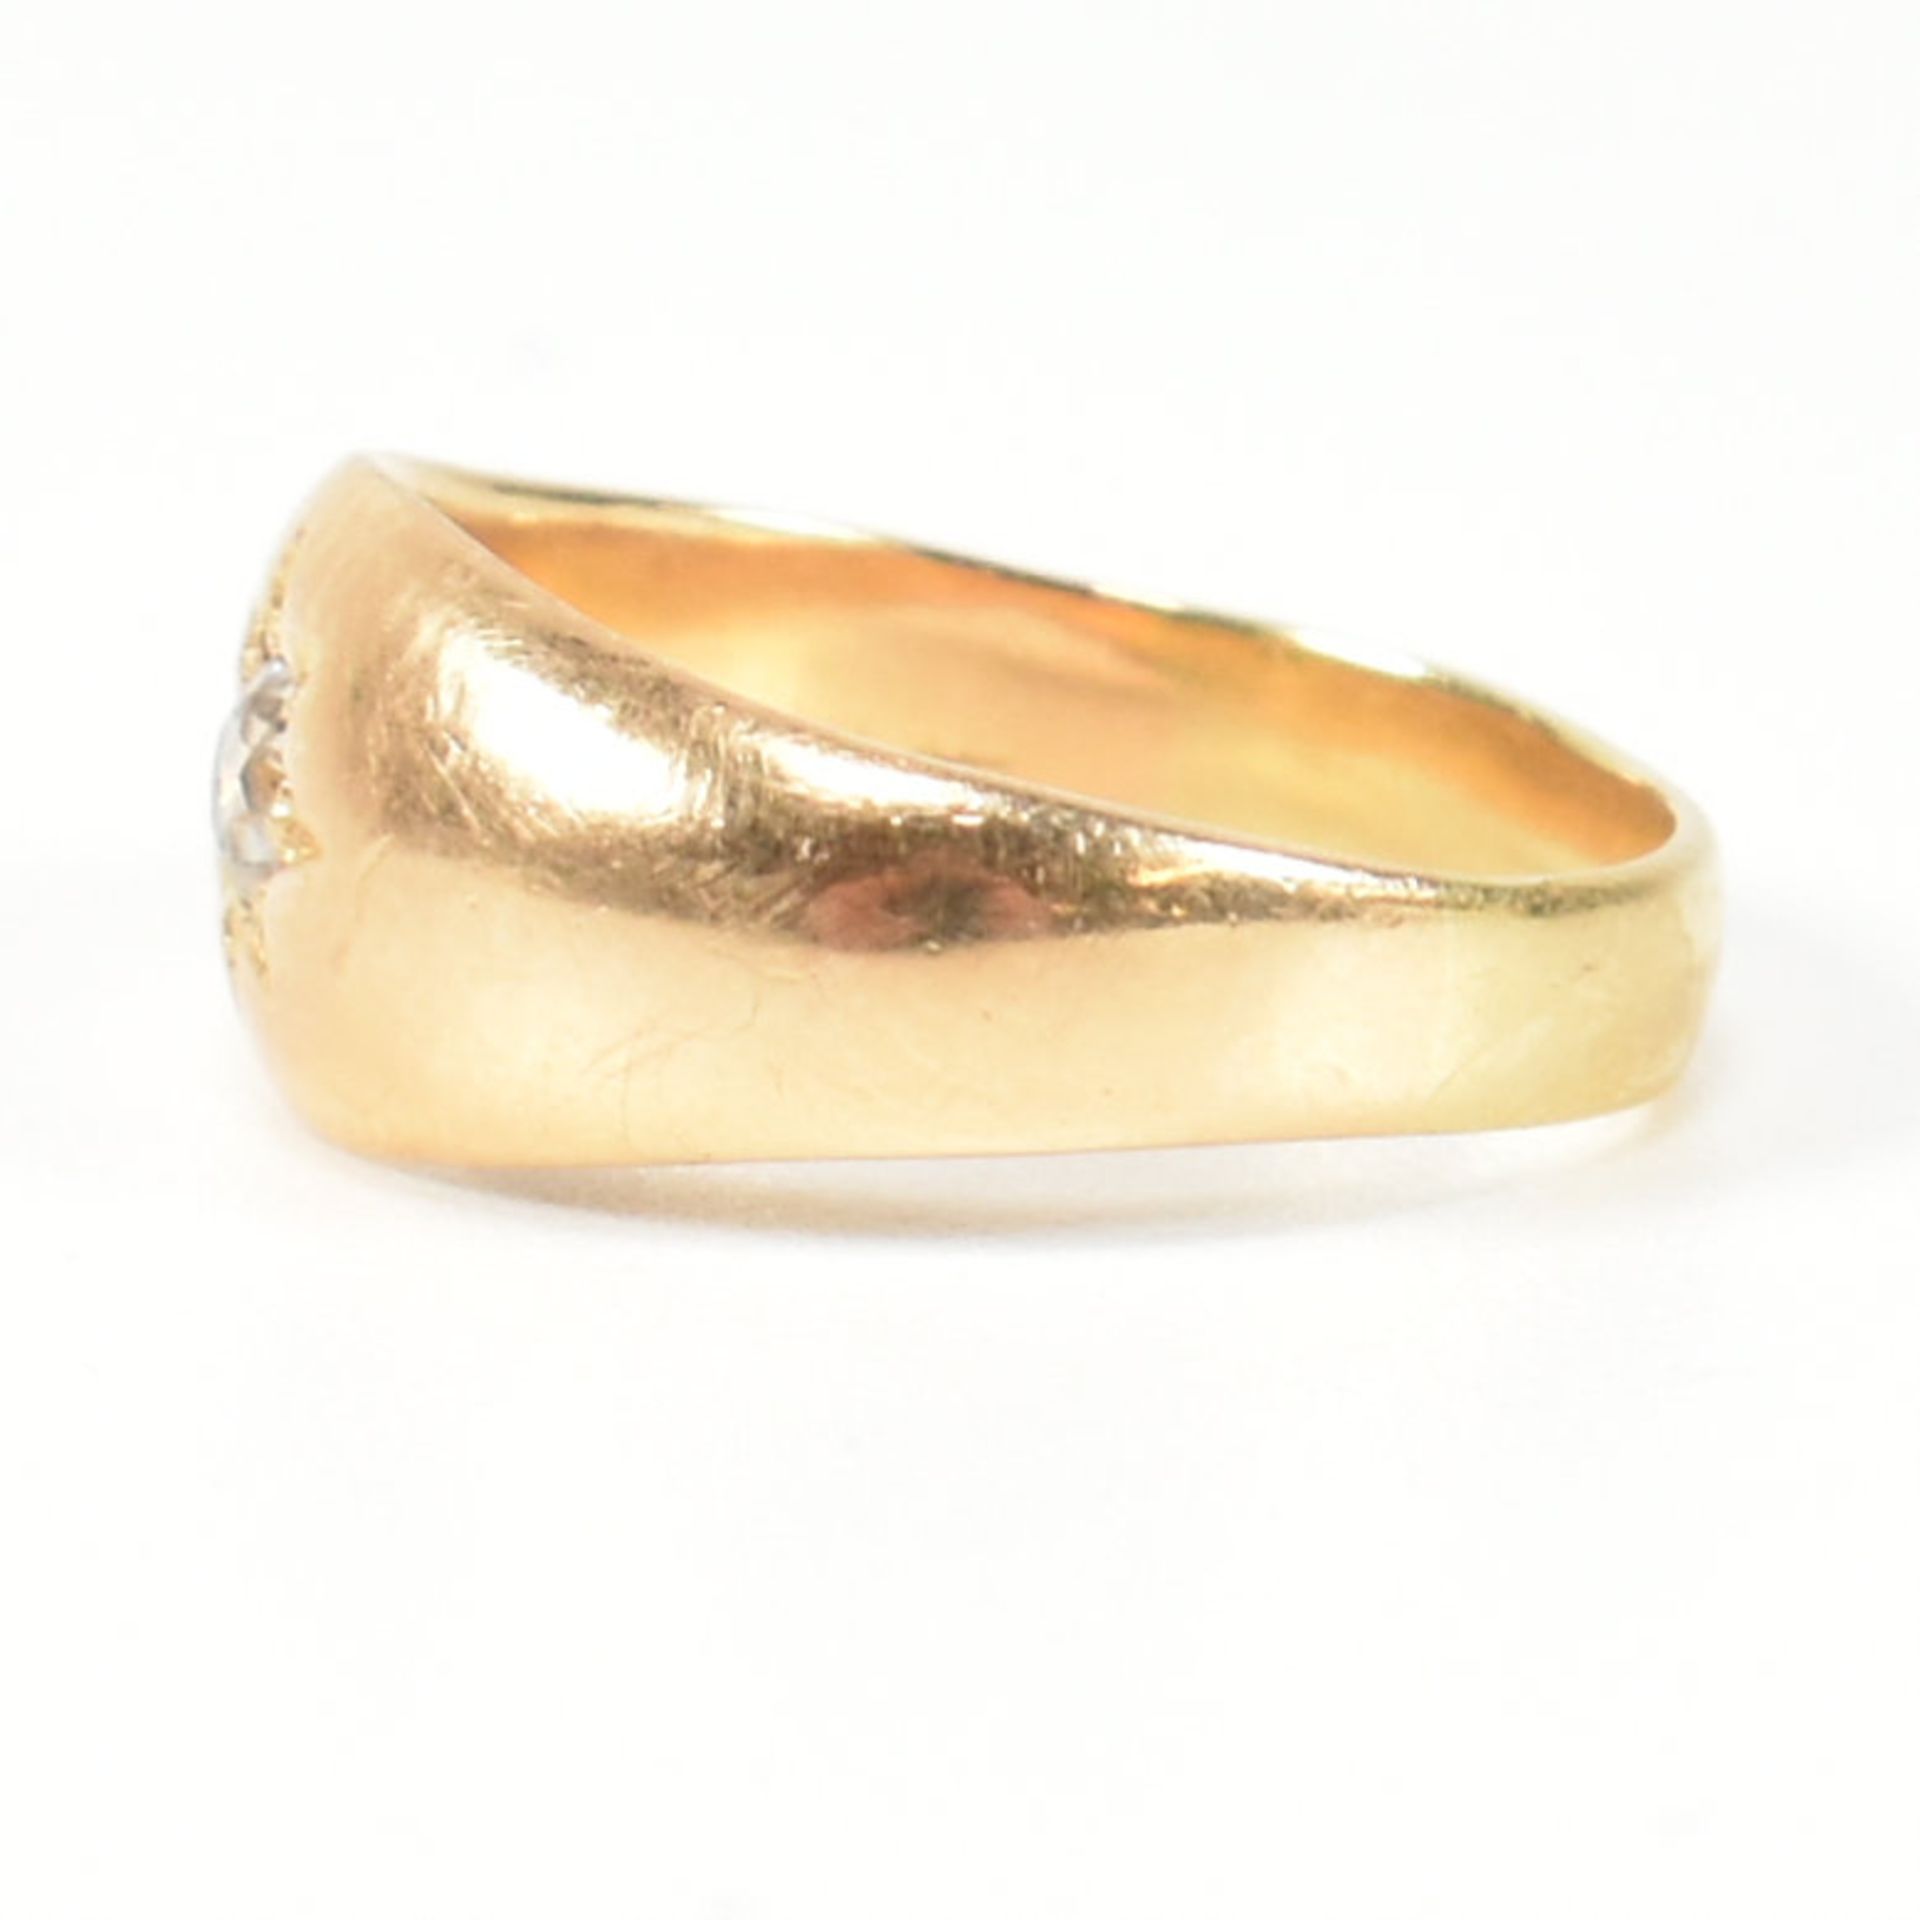 EARLY 20TH CENTURY 18CT GOLD & DIAMOND GYPSY RING - Image 3 of 7